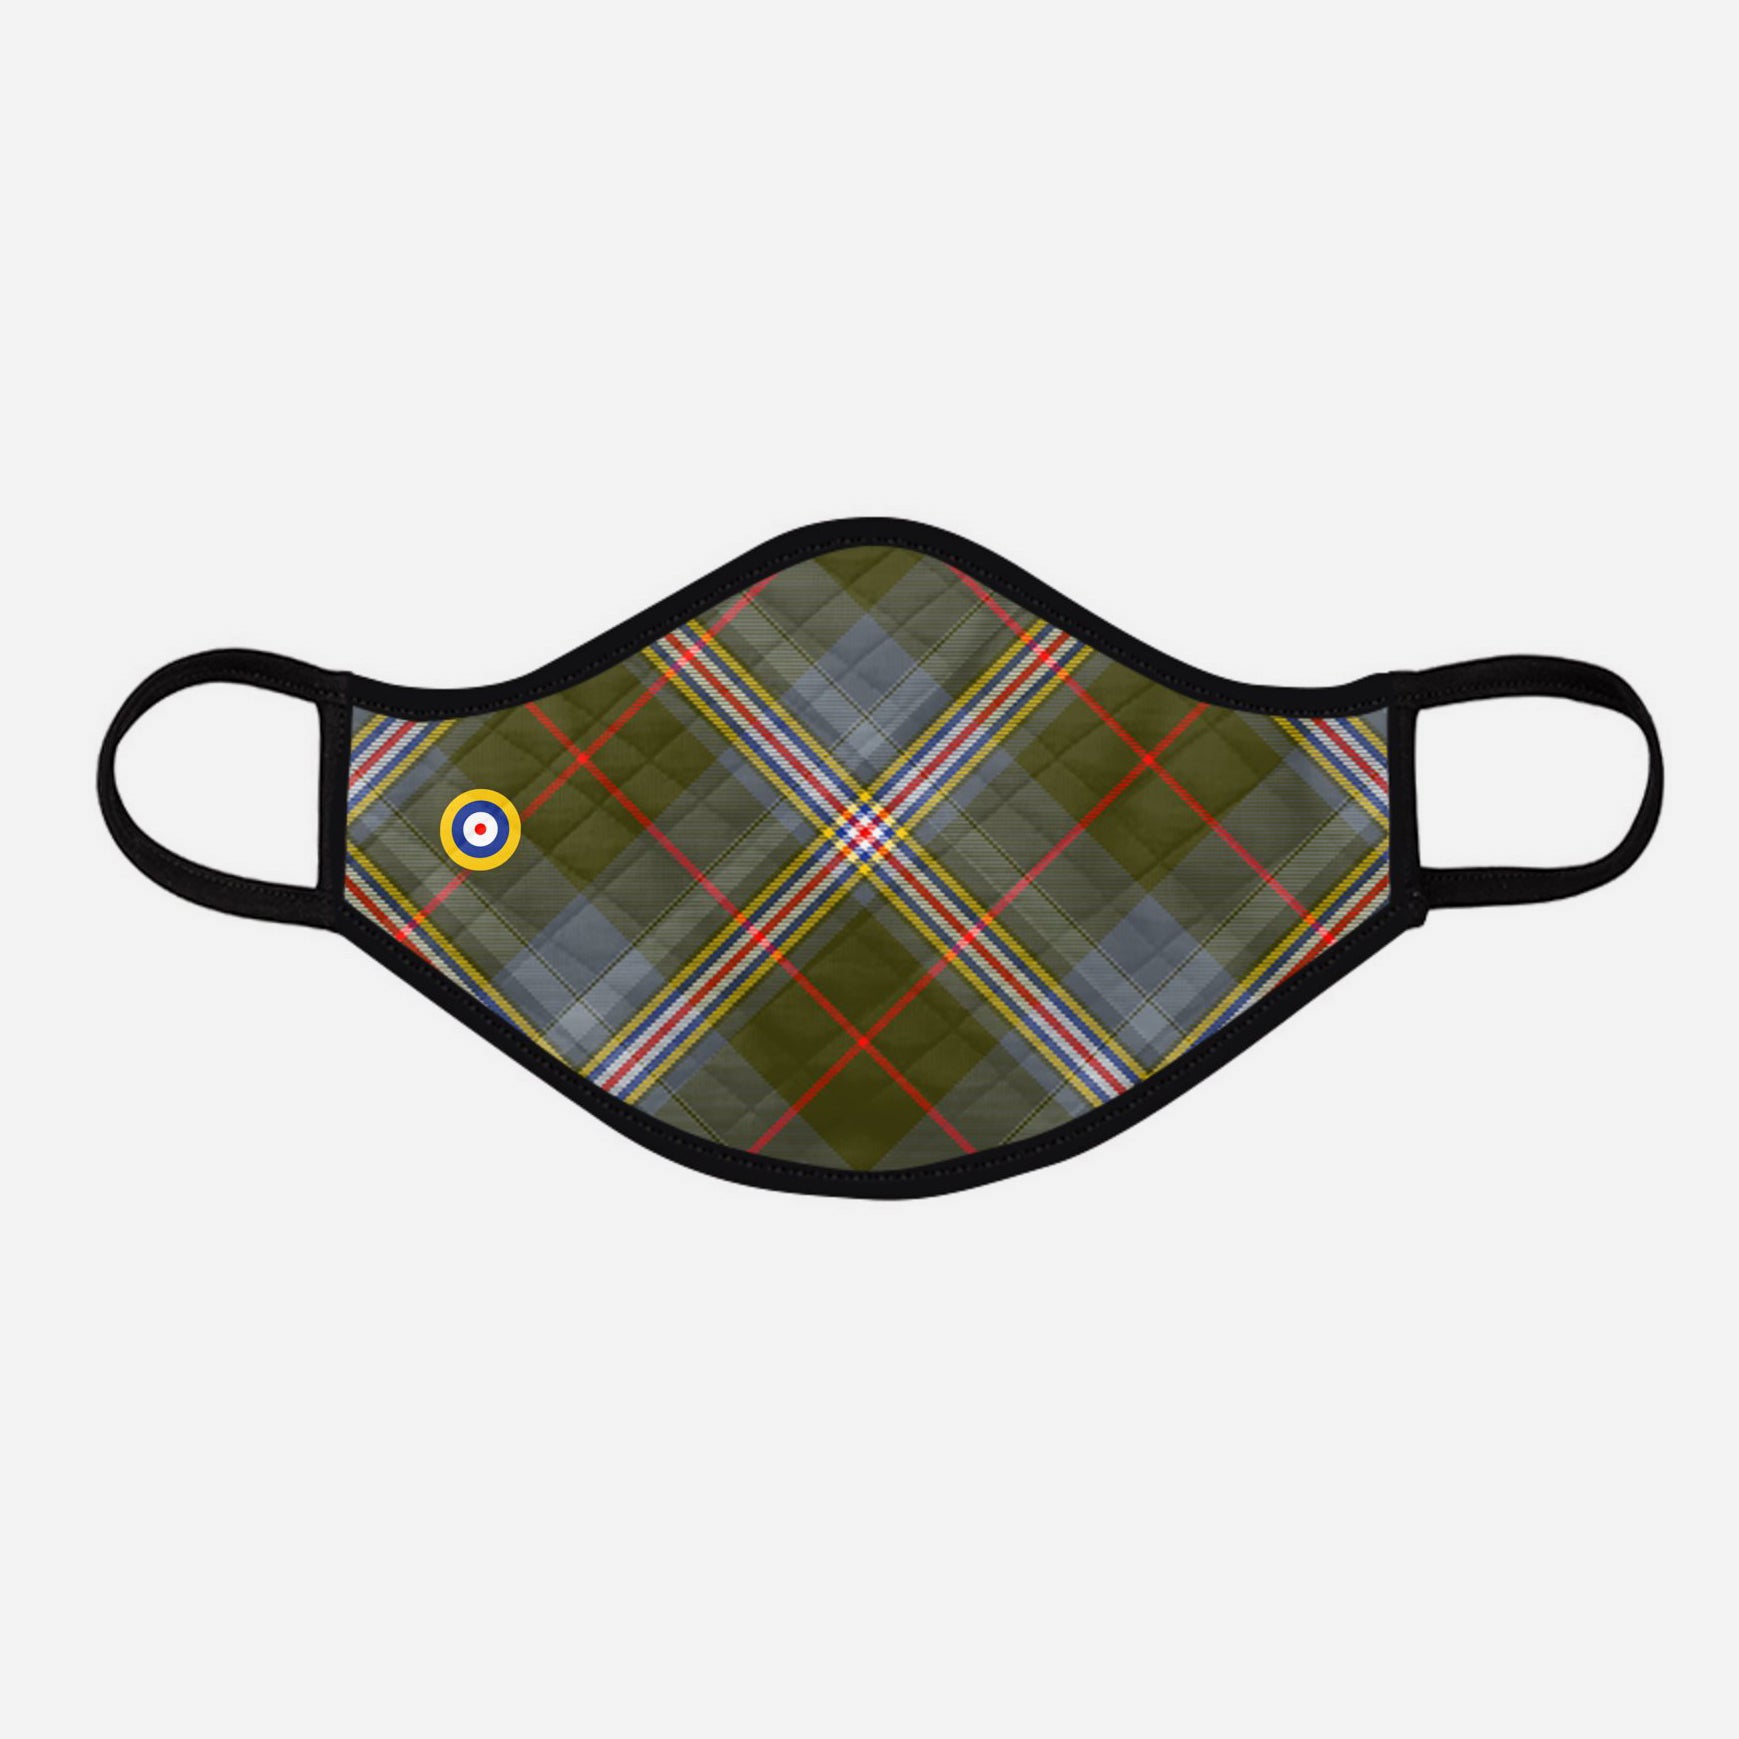 Tartan Face coverings face masks Covid 19 Covid-19 Pandemic Coronavirus Virus cough sneeze by Steven Patrick Sim the Tartan Artisan Stevie Tartan Guy - Nicola Sturgeon homeless - four pack combo - large - including Red Lichtie Spitfire anniversary - four pack combo large